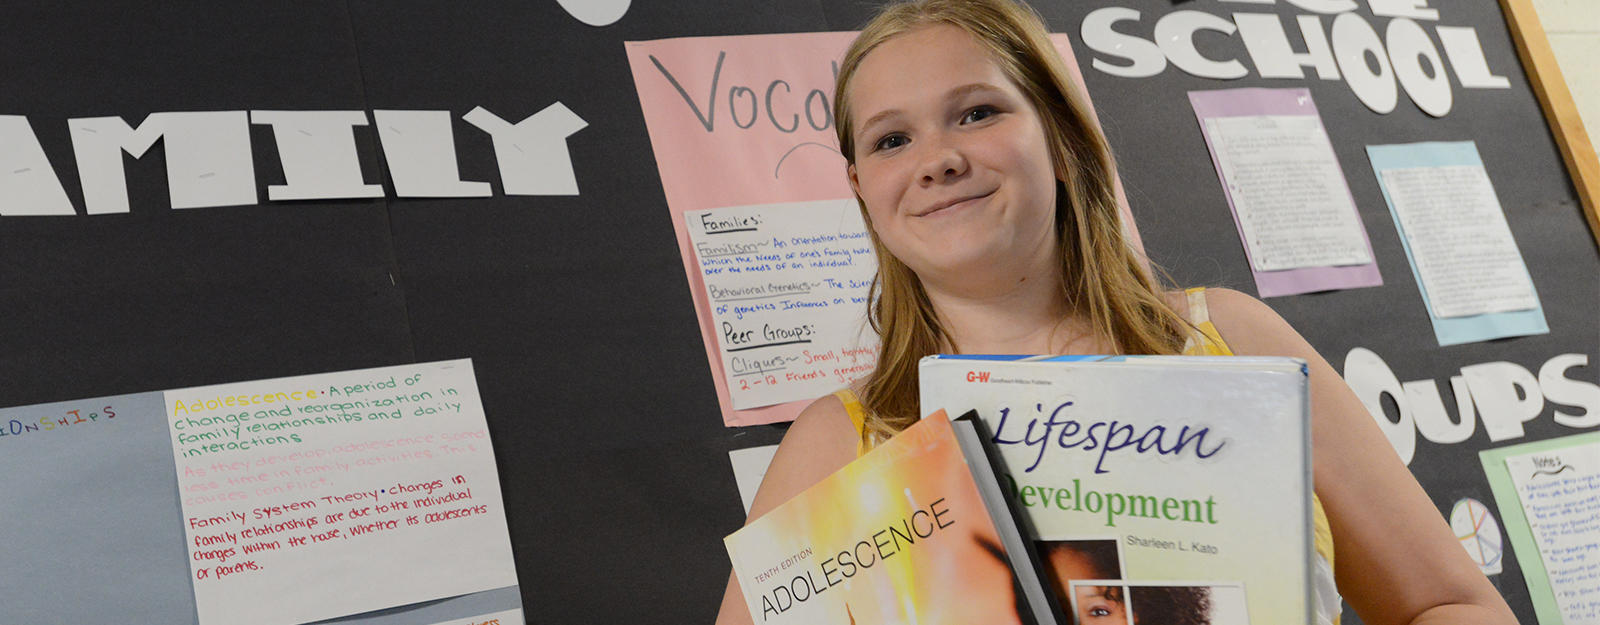 Student holding an armful of FACS textbooks in front of a FACS bulletin board.